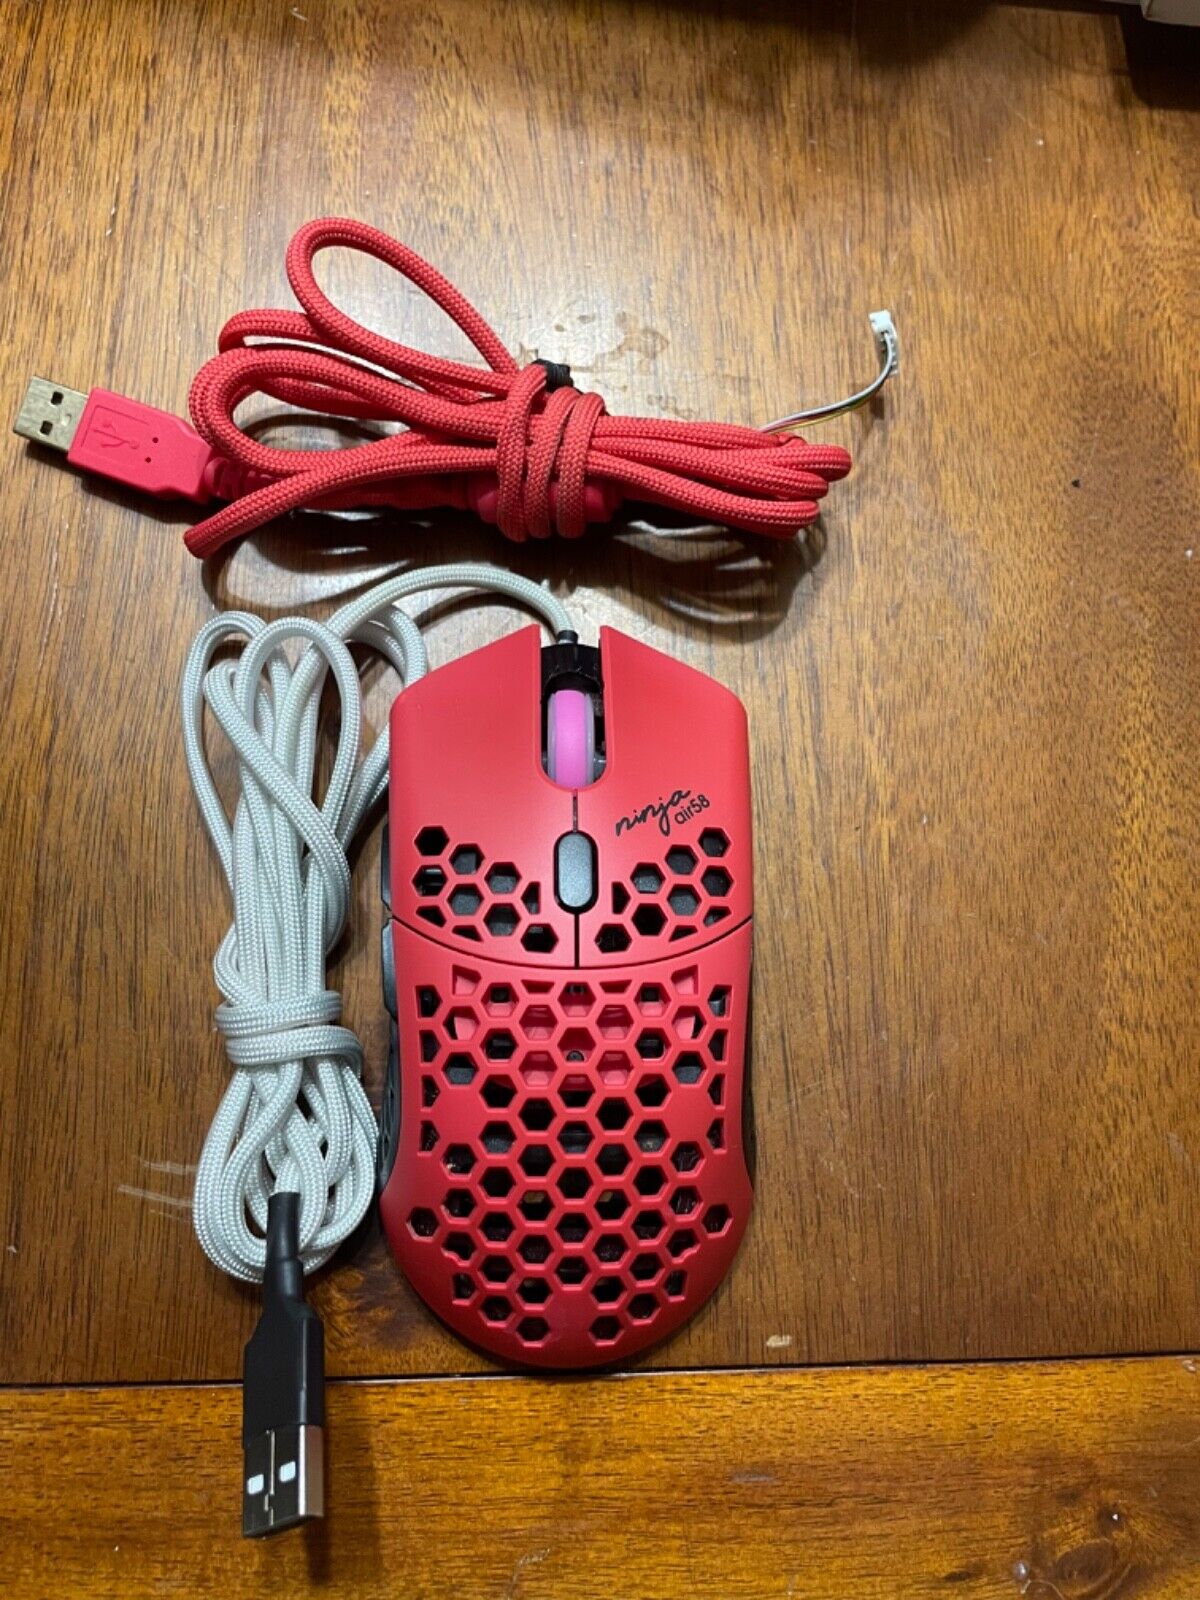 custom final mouse ninja air 58 with mouse wheel,paracord and slides